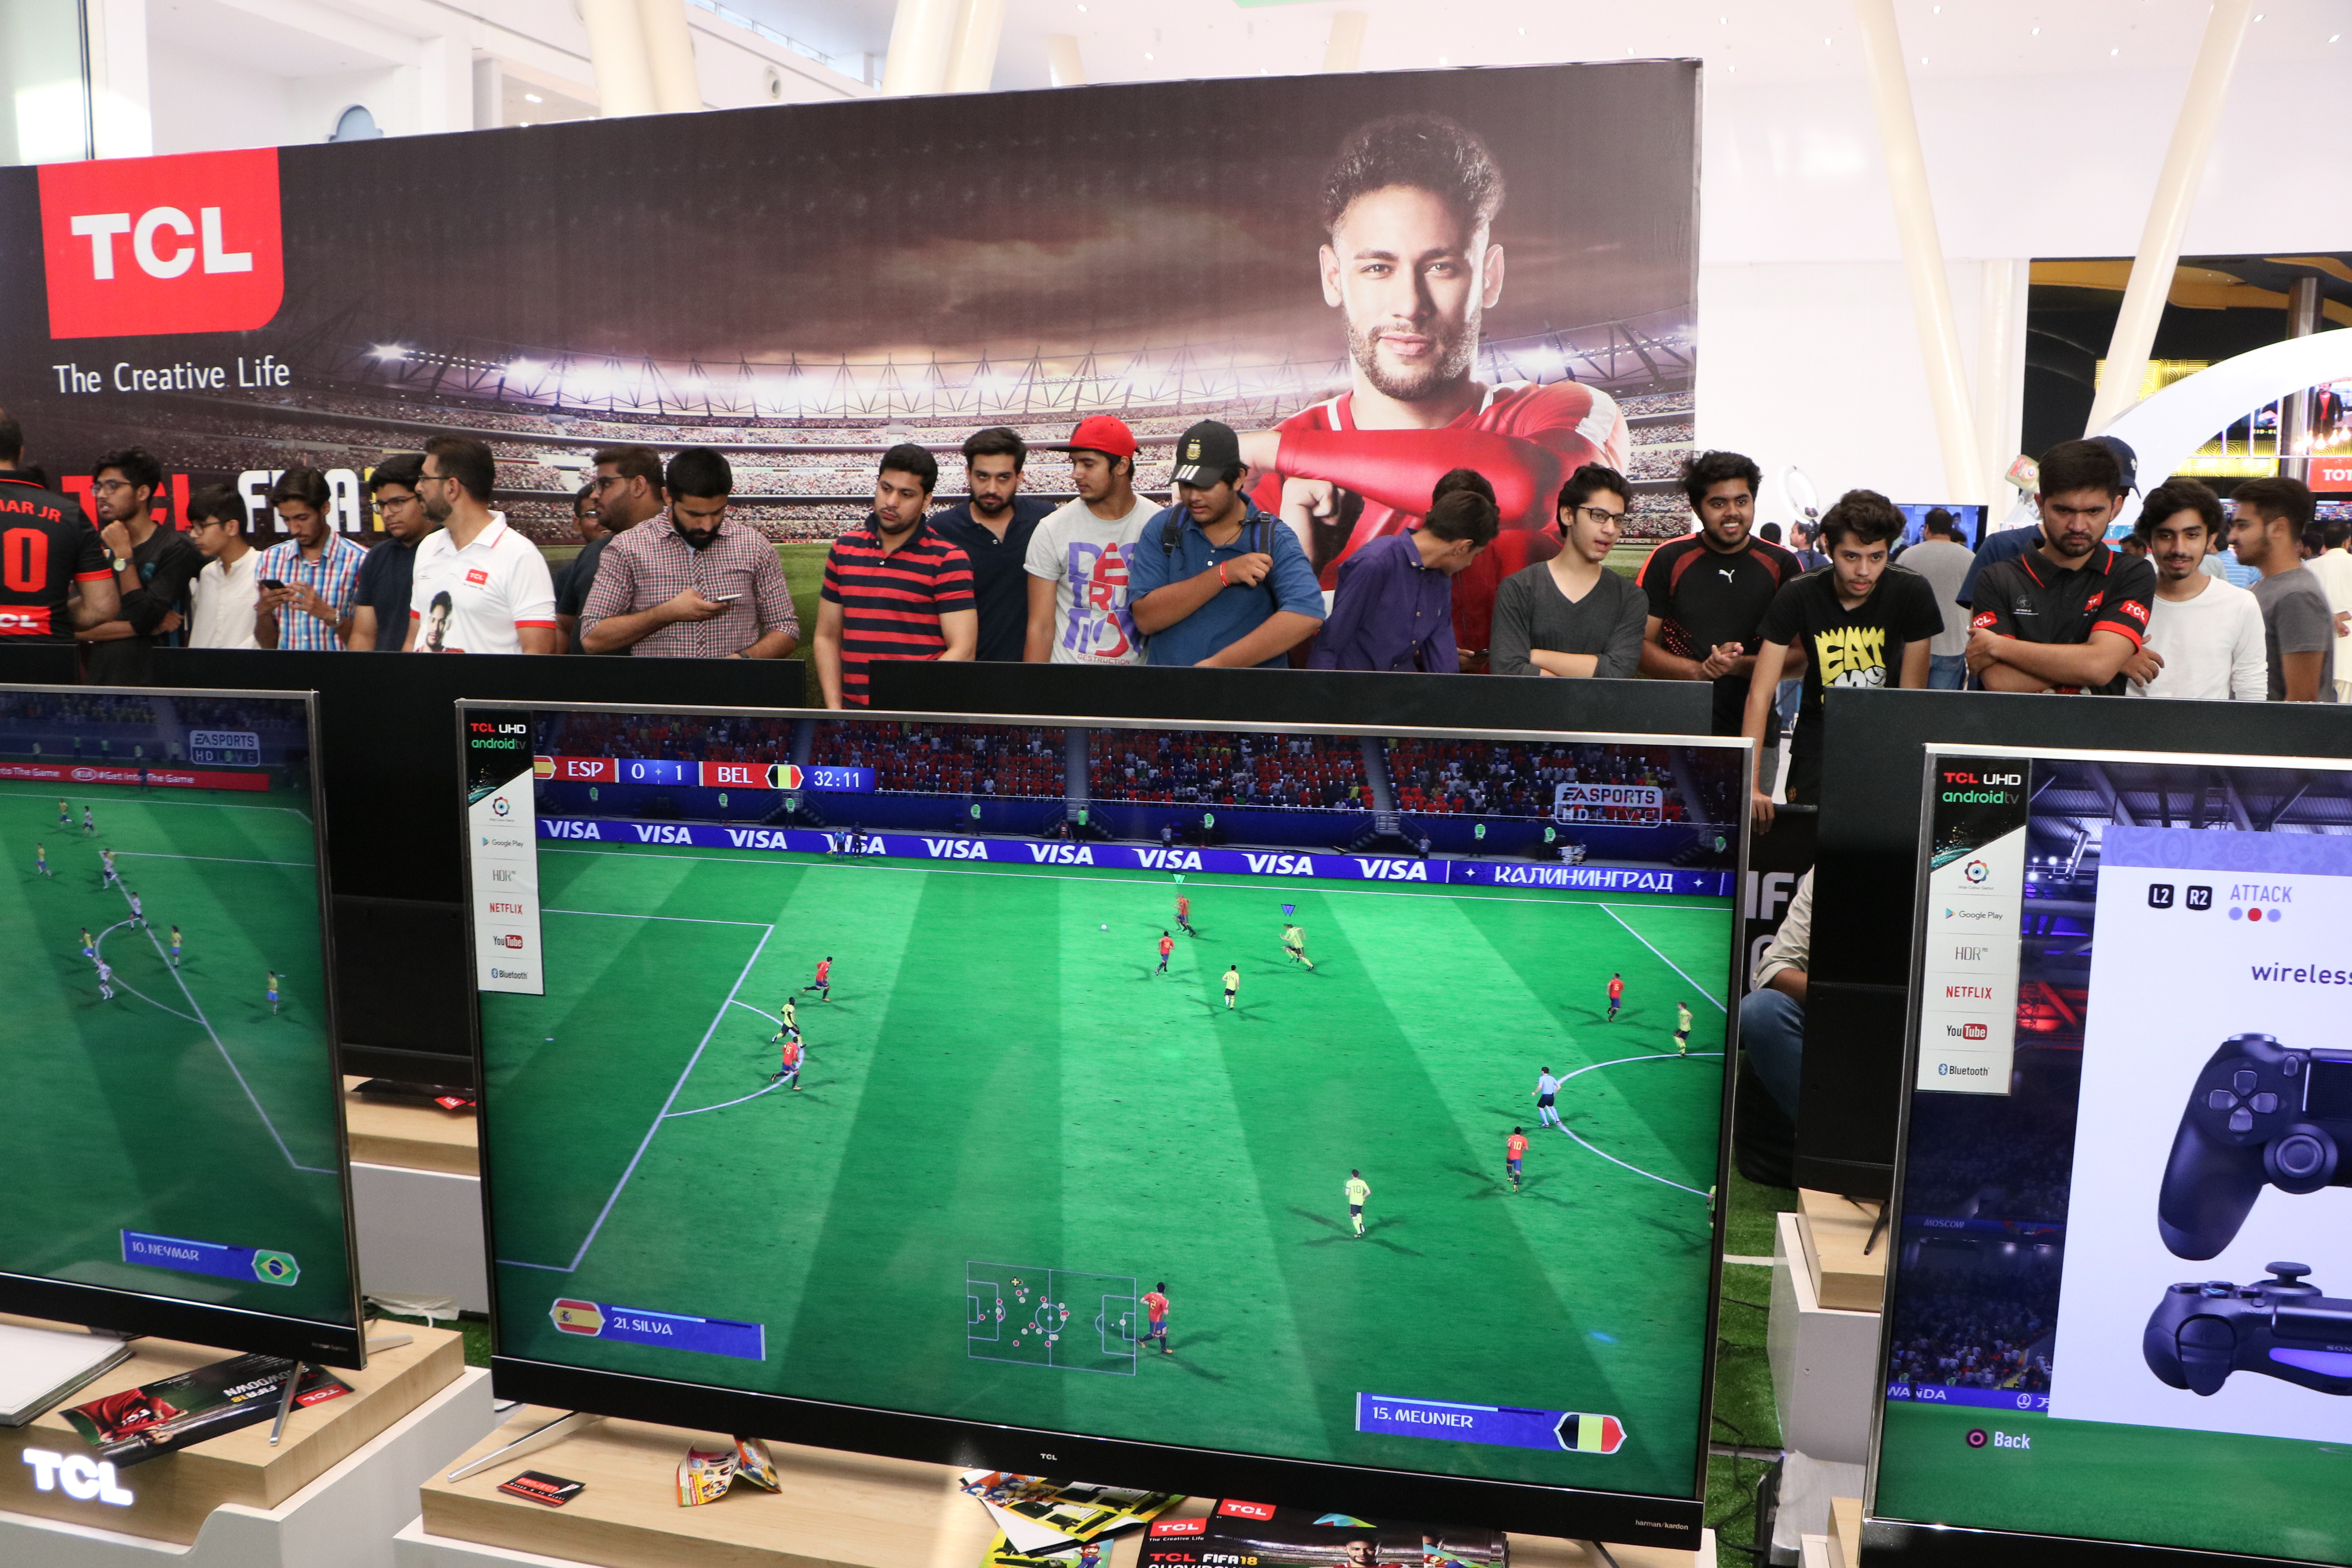 TCL Holds Biggest FIFA Gaming Showdown Event in Lahore  